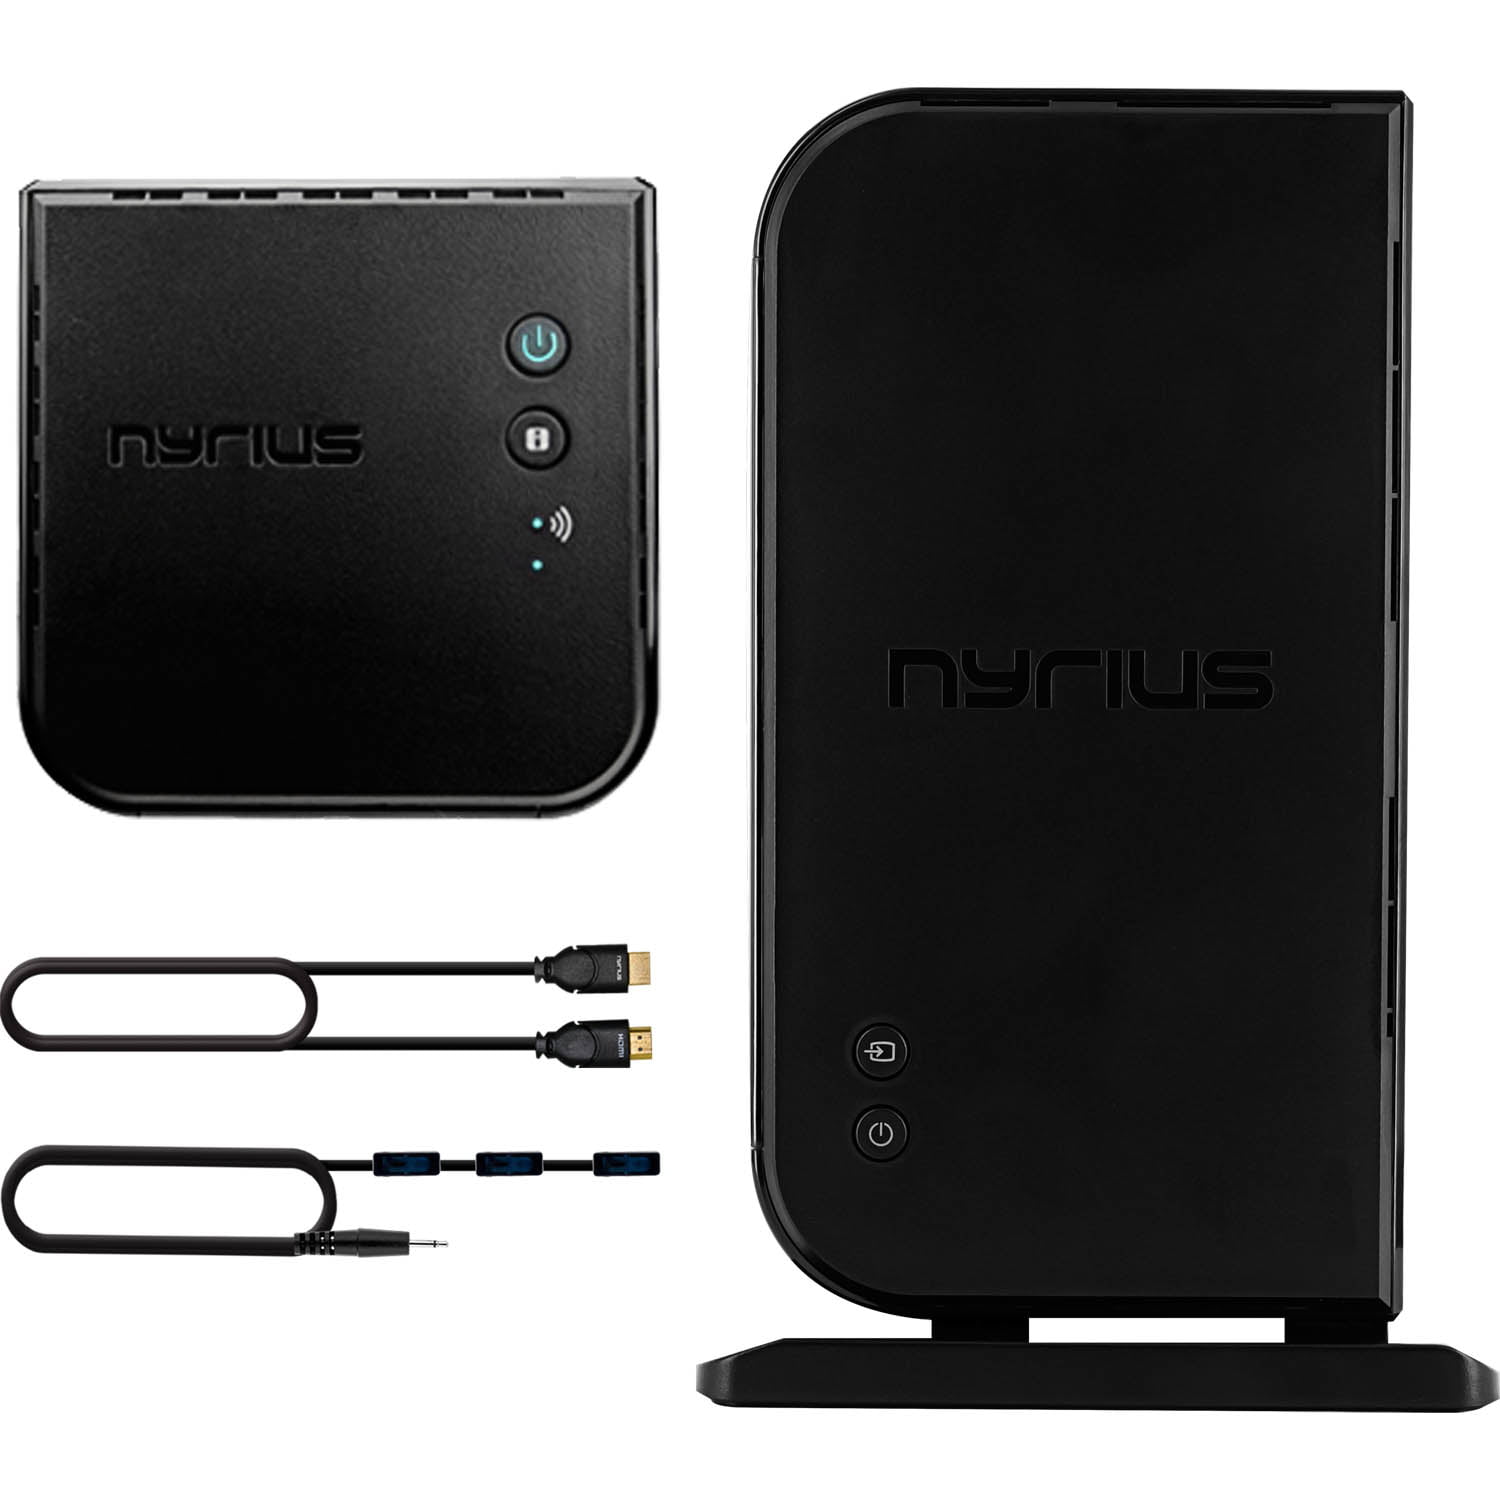 Nyrius ARIES Home HDMI Digital Wireless Transmitter & Receiver for HD 1080p Video Streaming